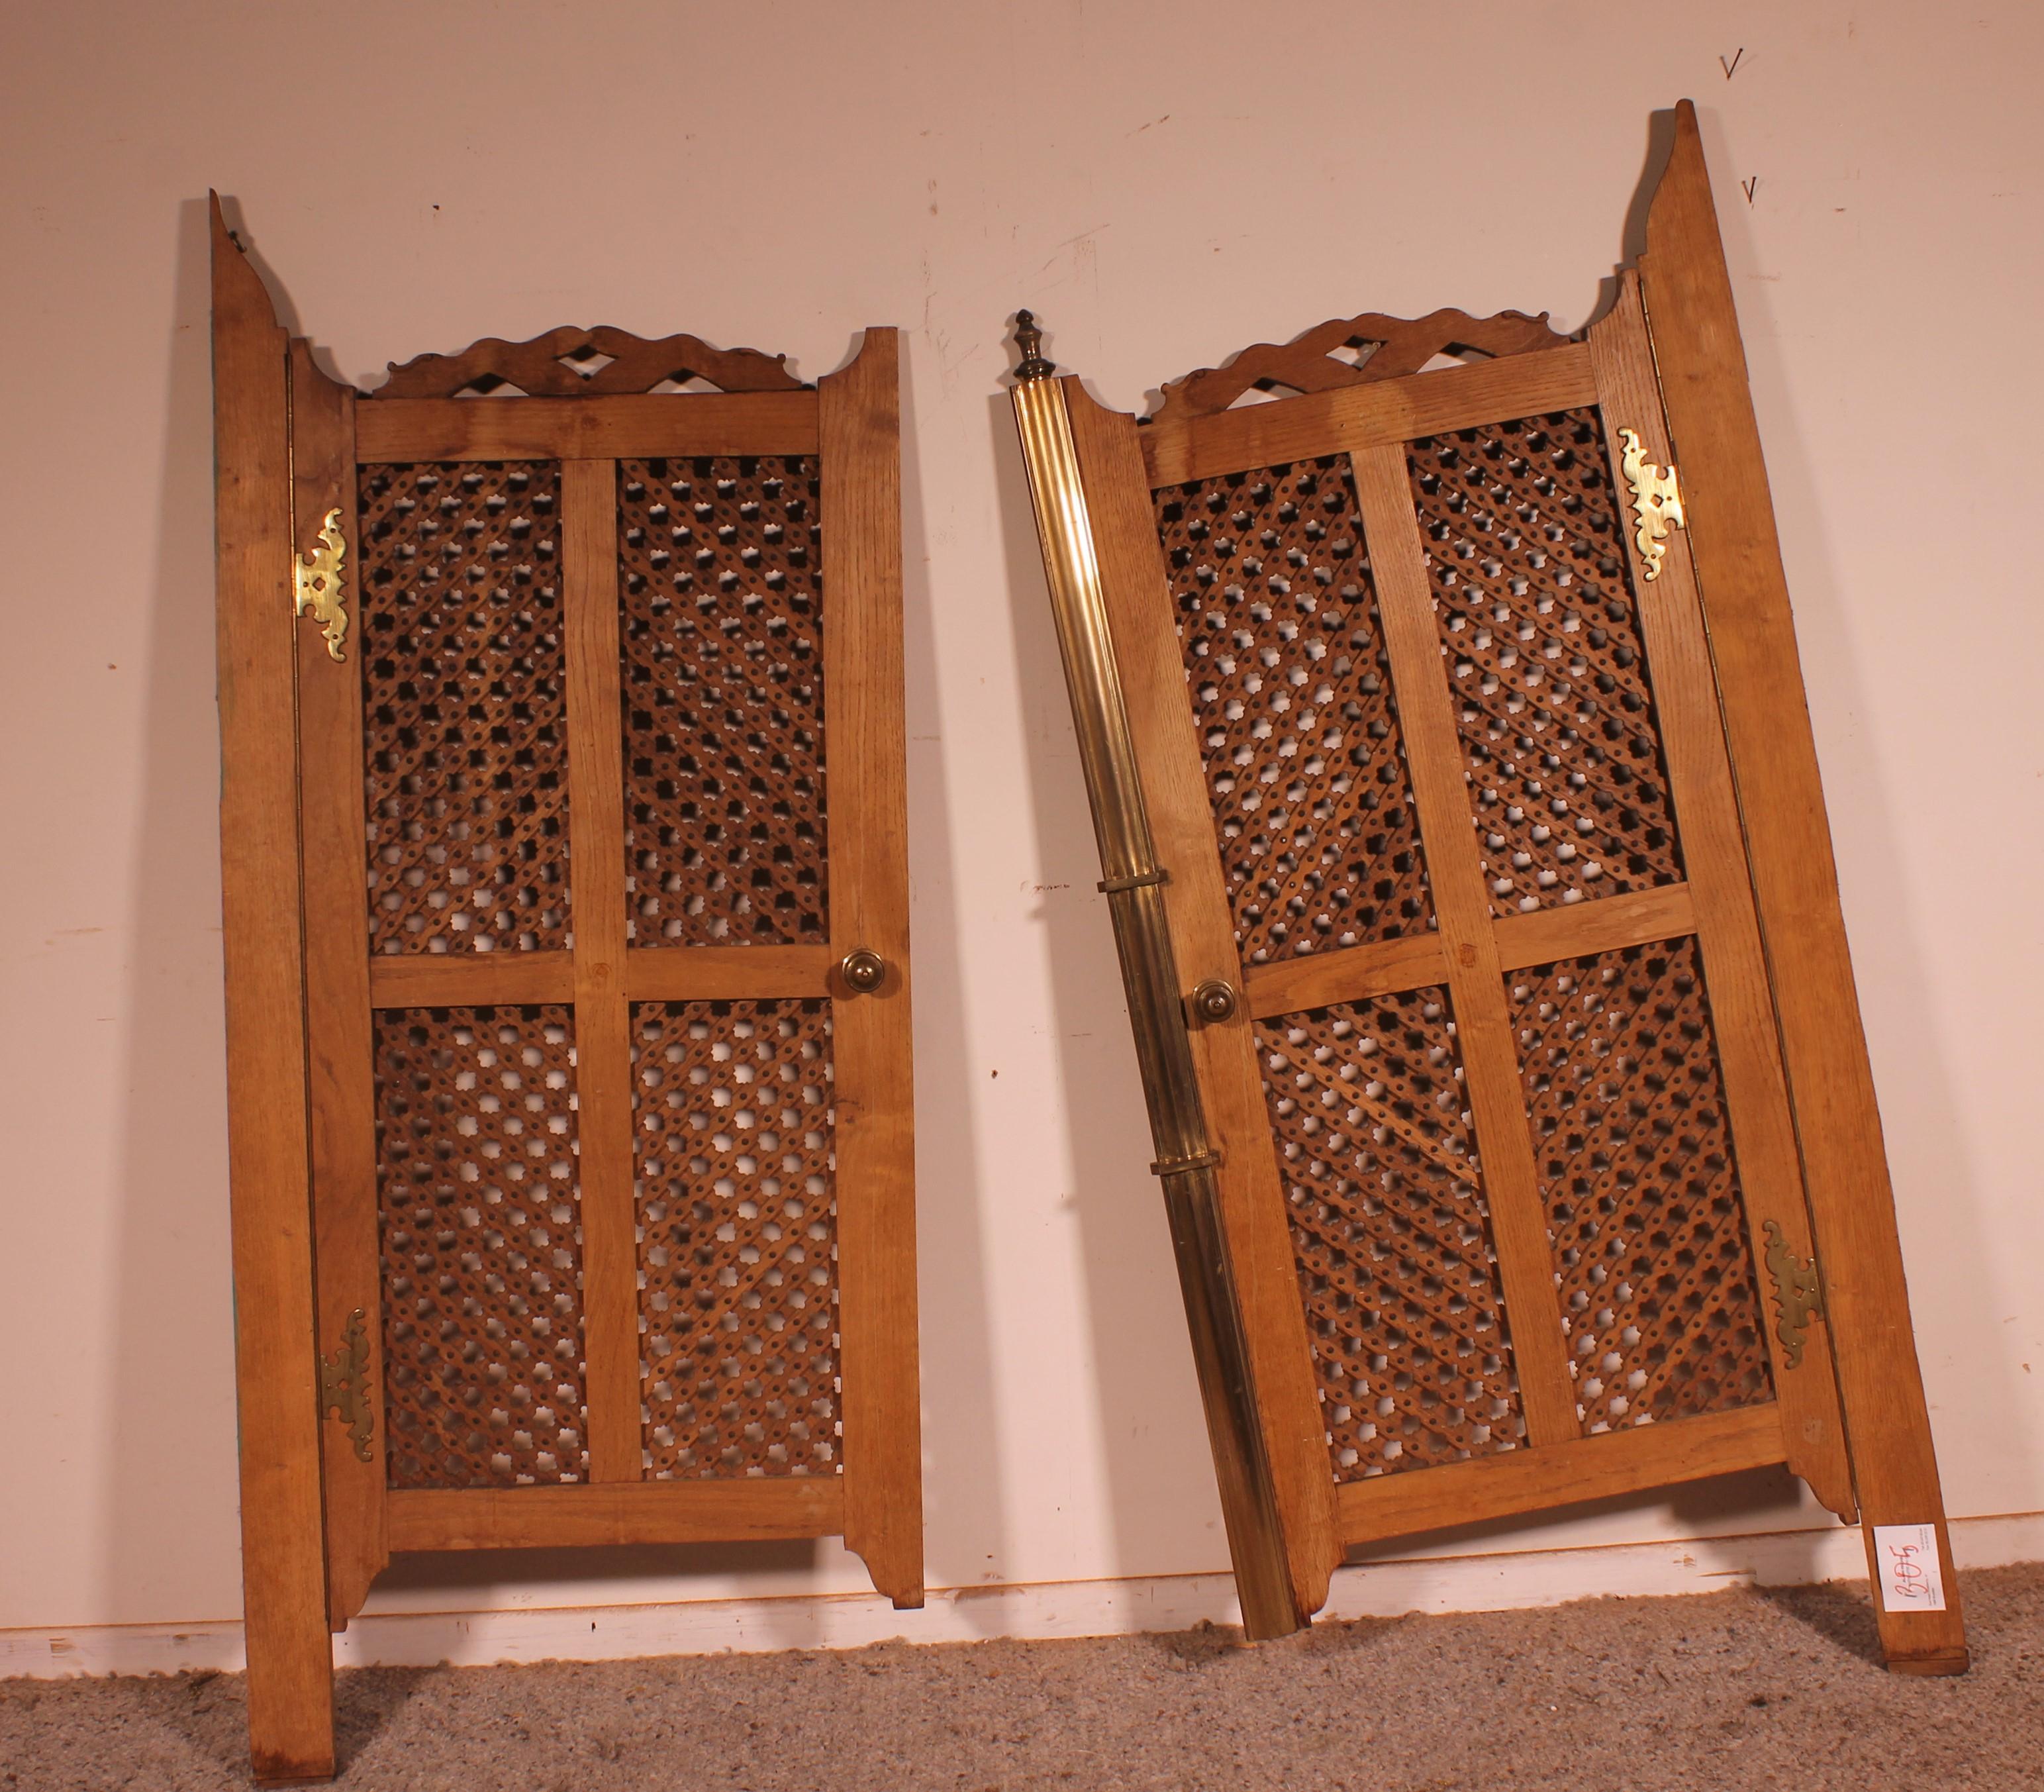 Magnificent pair of oak hining doors (saloon doors) from the 19th century Hispano Moorish style
The doors have a lock so it's possible to lock the doors.

dimensions: height of the two upright 1m50
width of the doors excluding the upright